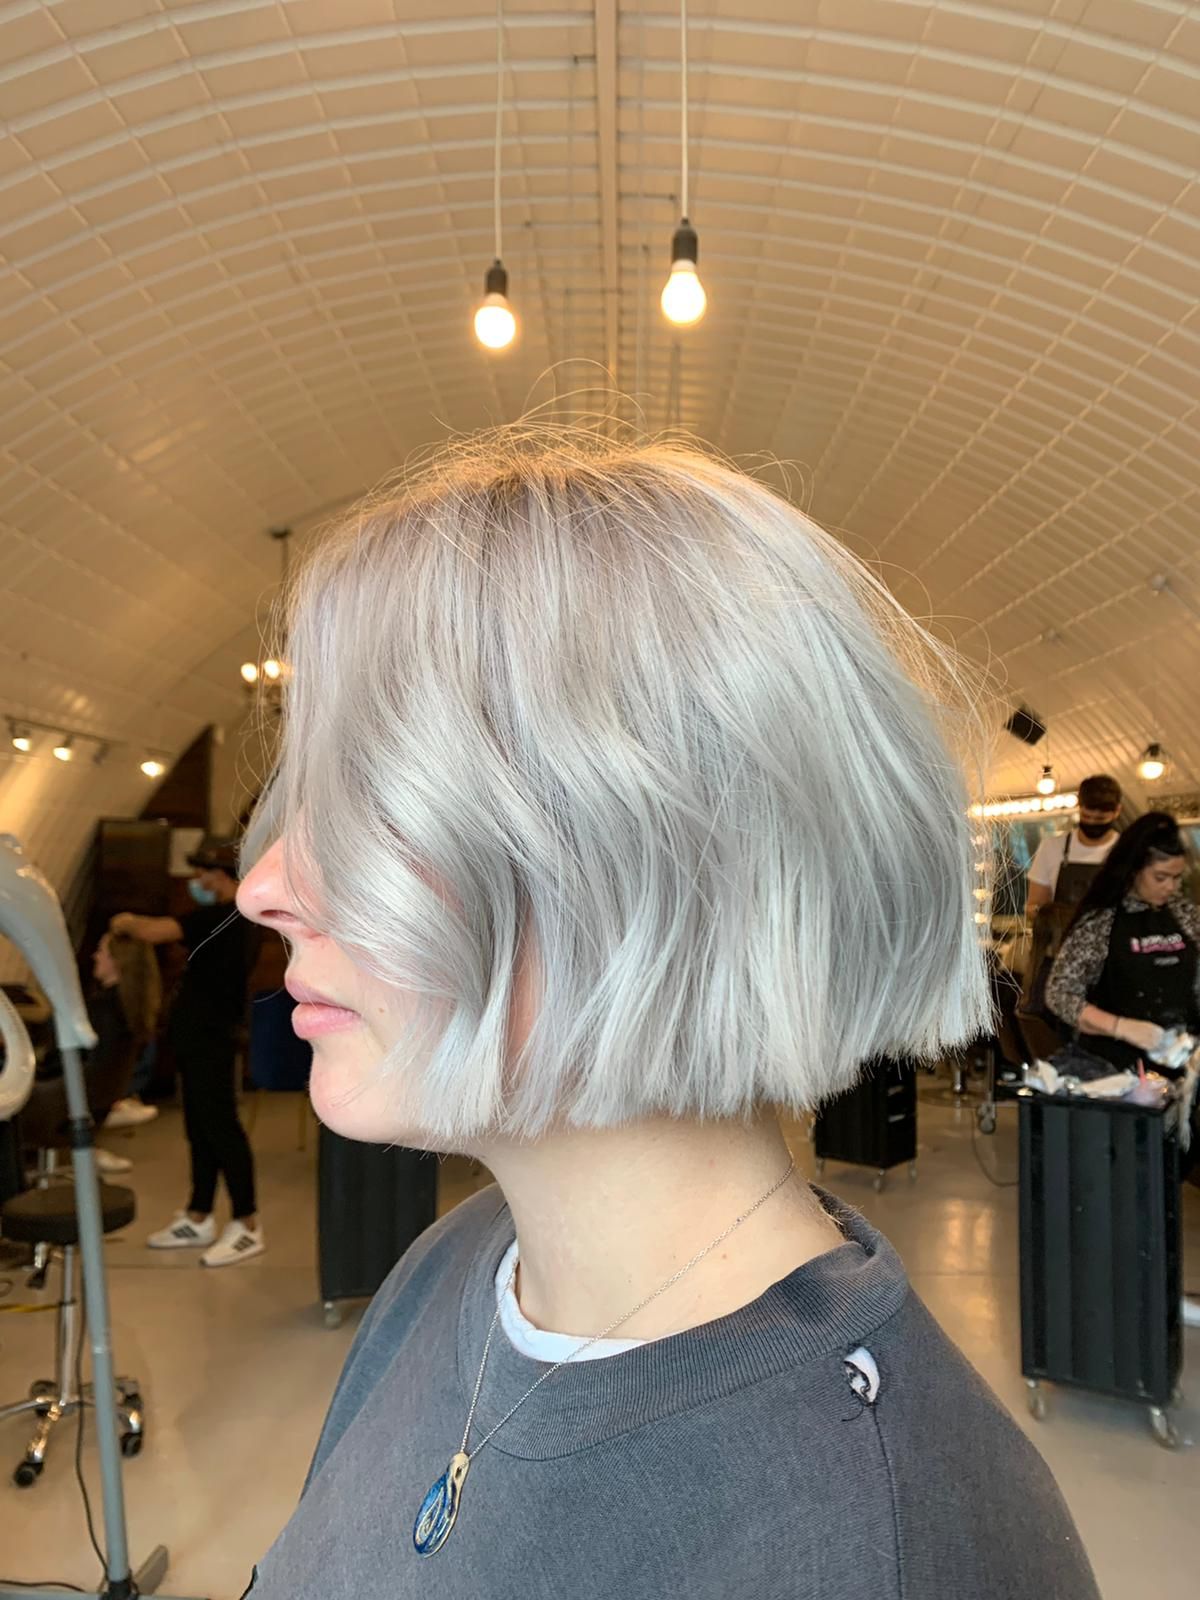 Short Hair Cuts – Bobs, Mid Length And More | Live True London Within Platinum Balayage On A Bob Hairstyles (View 18 of 25)